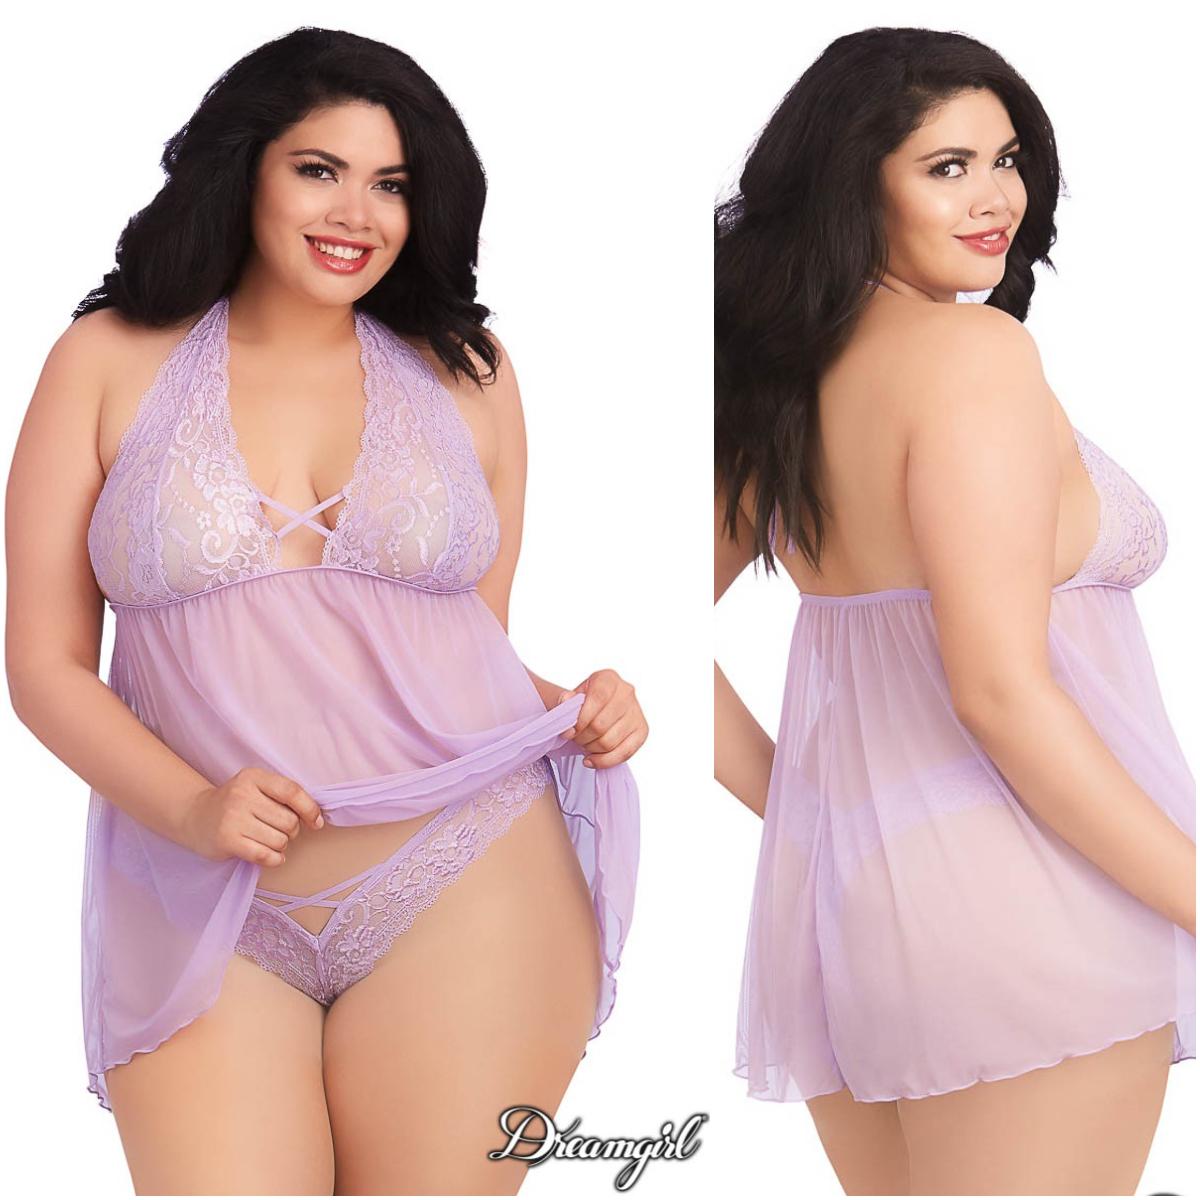 Babydoll - 9669X - Grande Taille - Dreamgirl